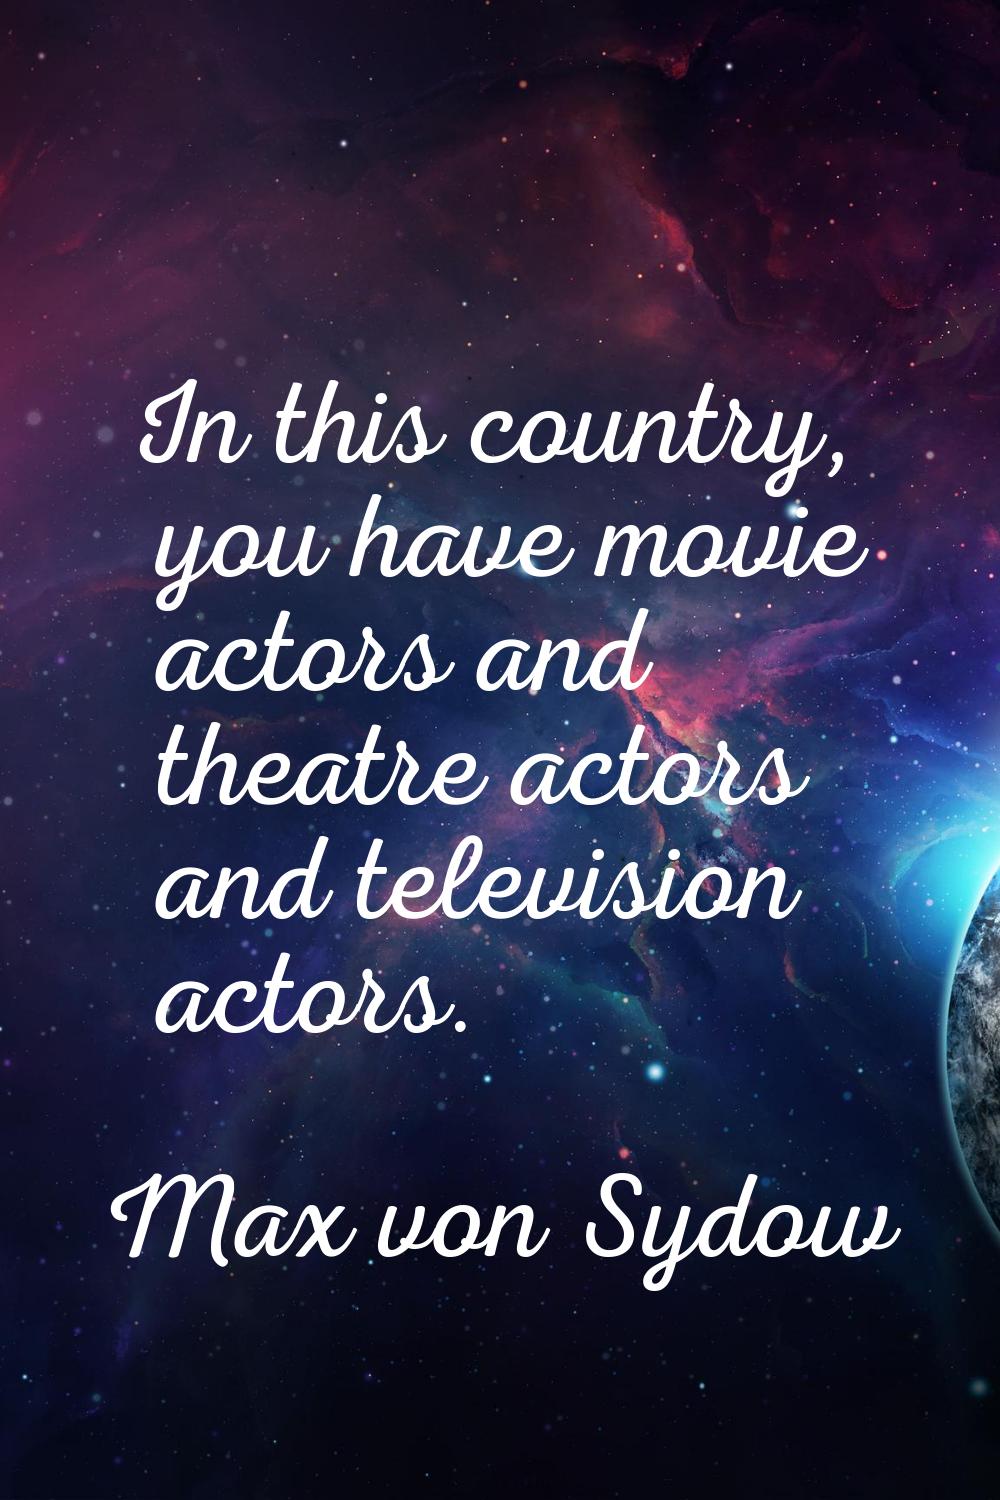 In this country, you have movie actors and theatre actors and television actors.